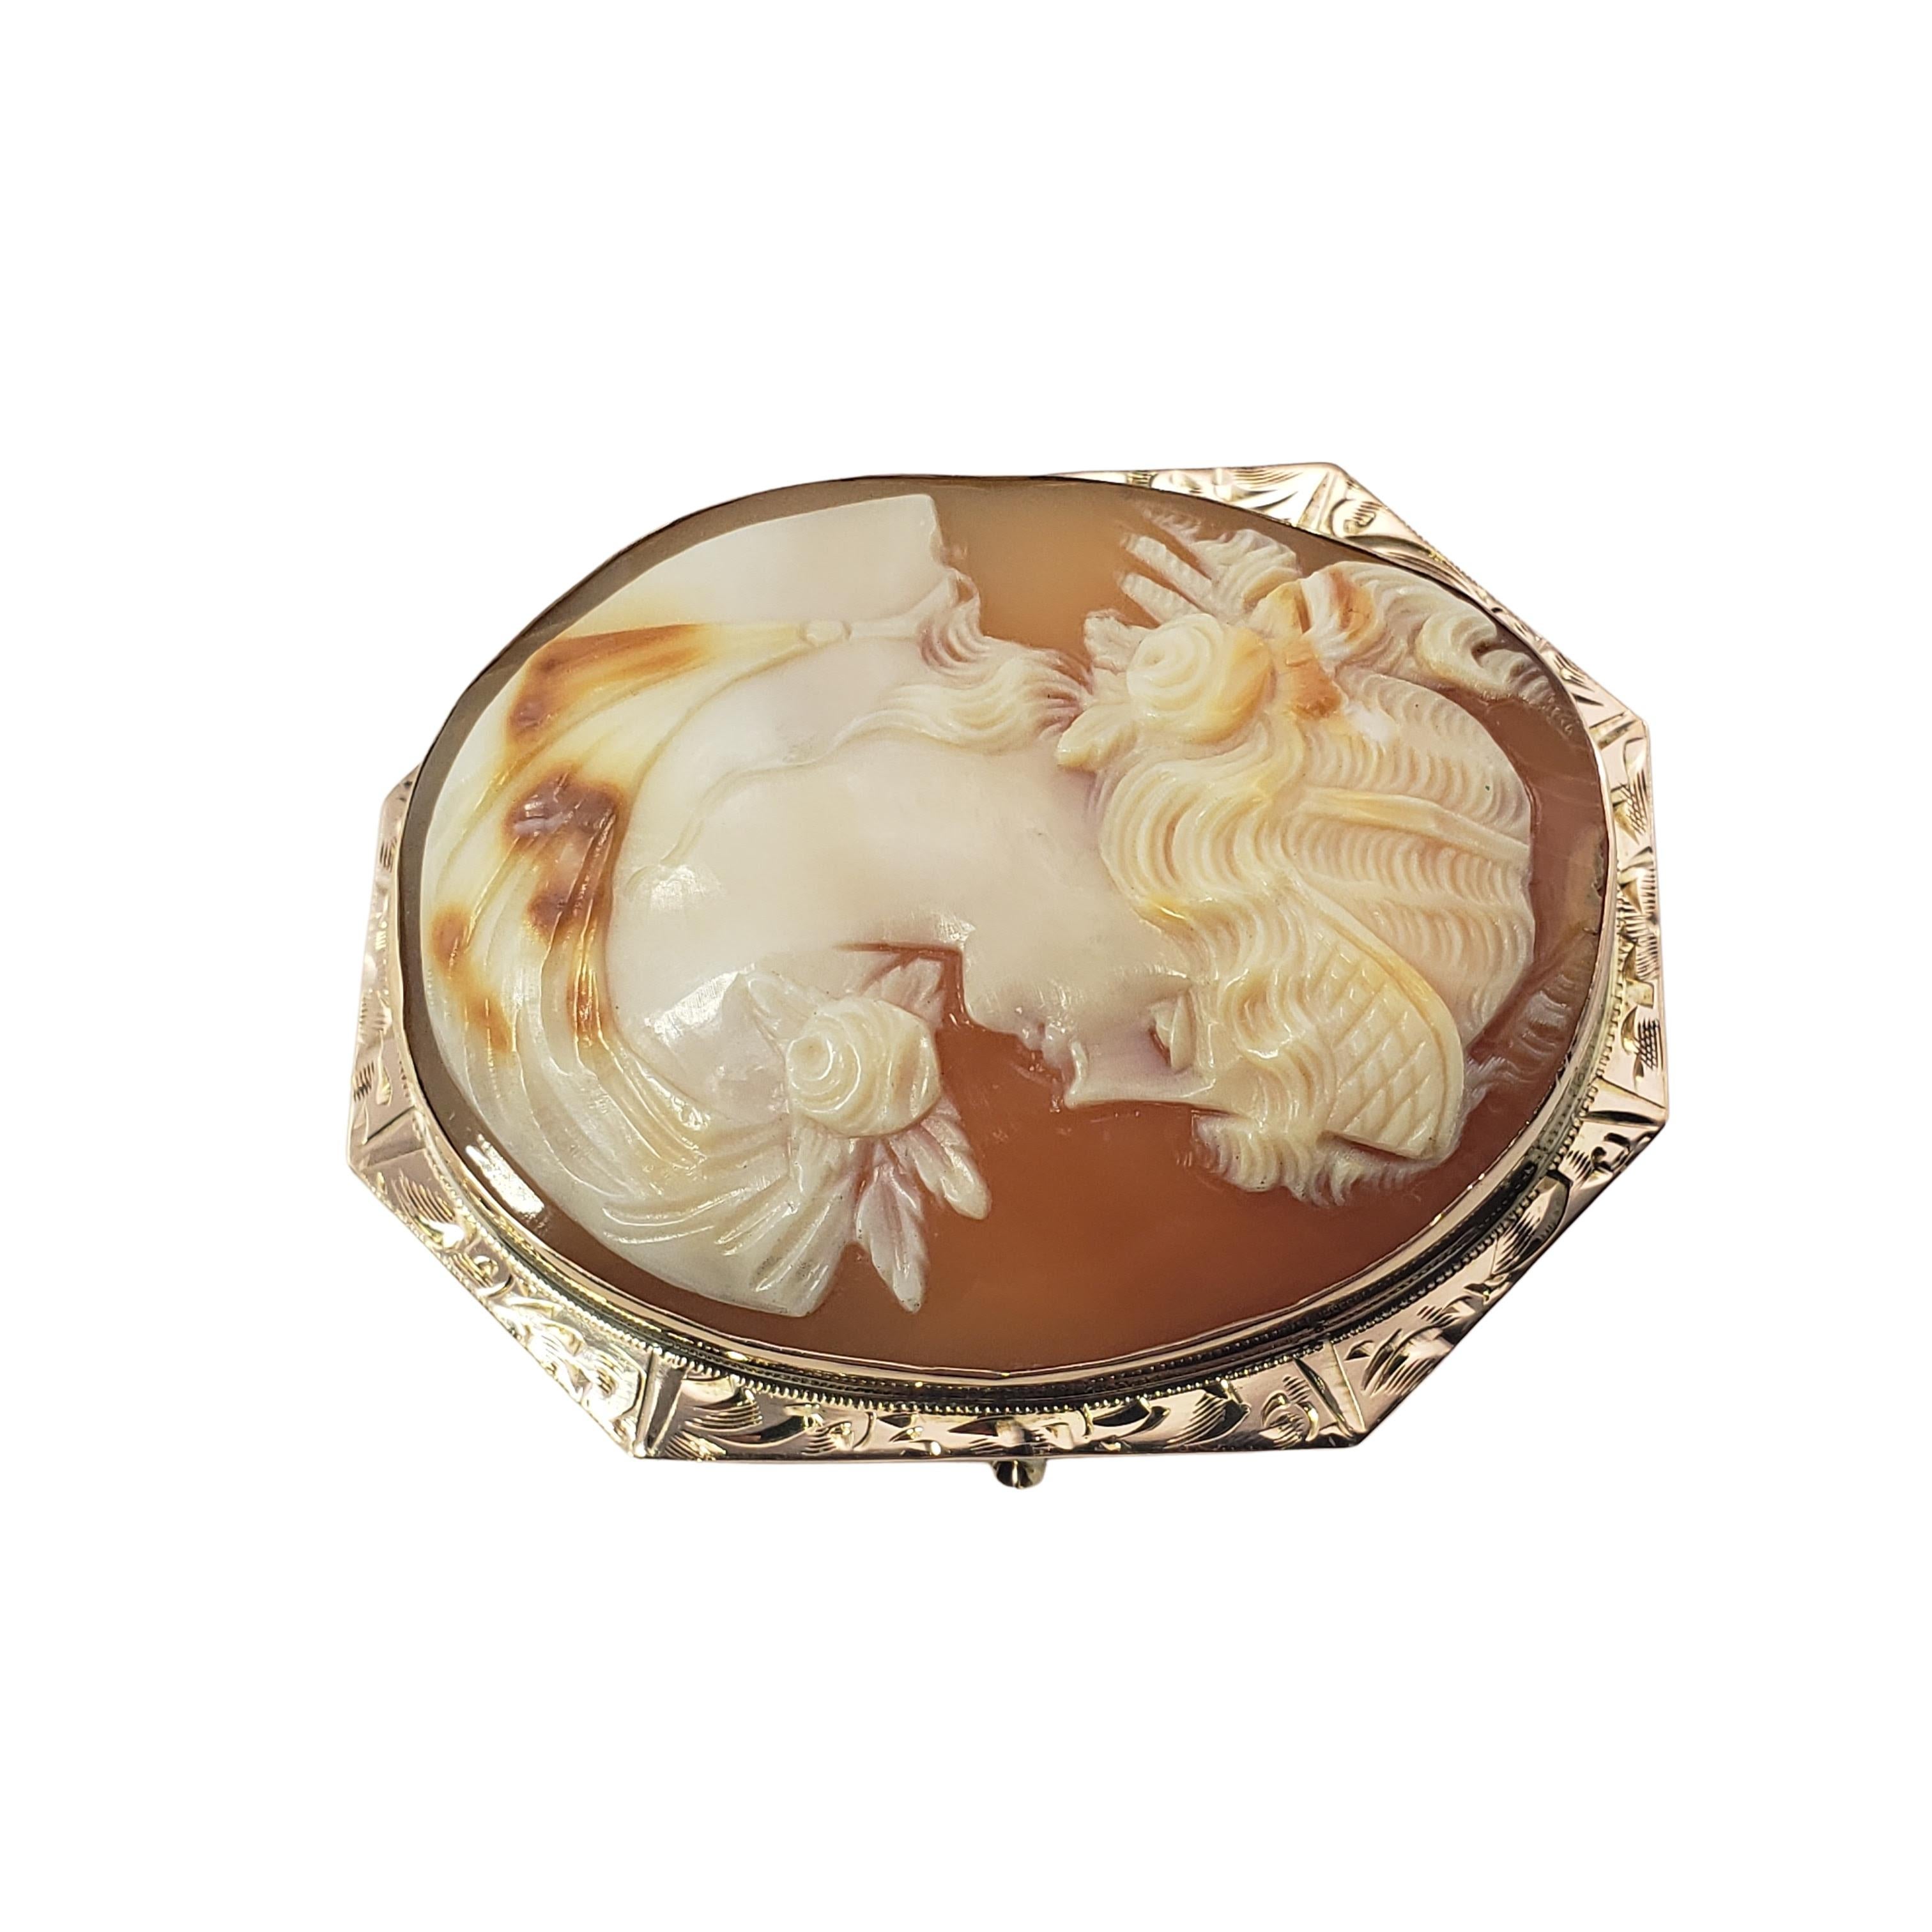 10 Karat Yellow Gold Cameo Brooch/Pendant-

This elegant cameo brooch features a lovely lady in profile set in beautifully detailed 10K yellow gold.  Can be worn as a brooch or a pendant.

Size:  47 mm x  38 mm

Weight:  7.3 dwt. /  11.4